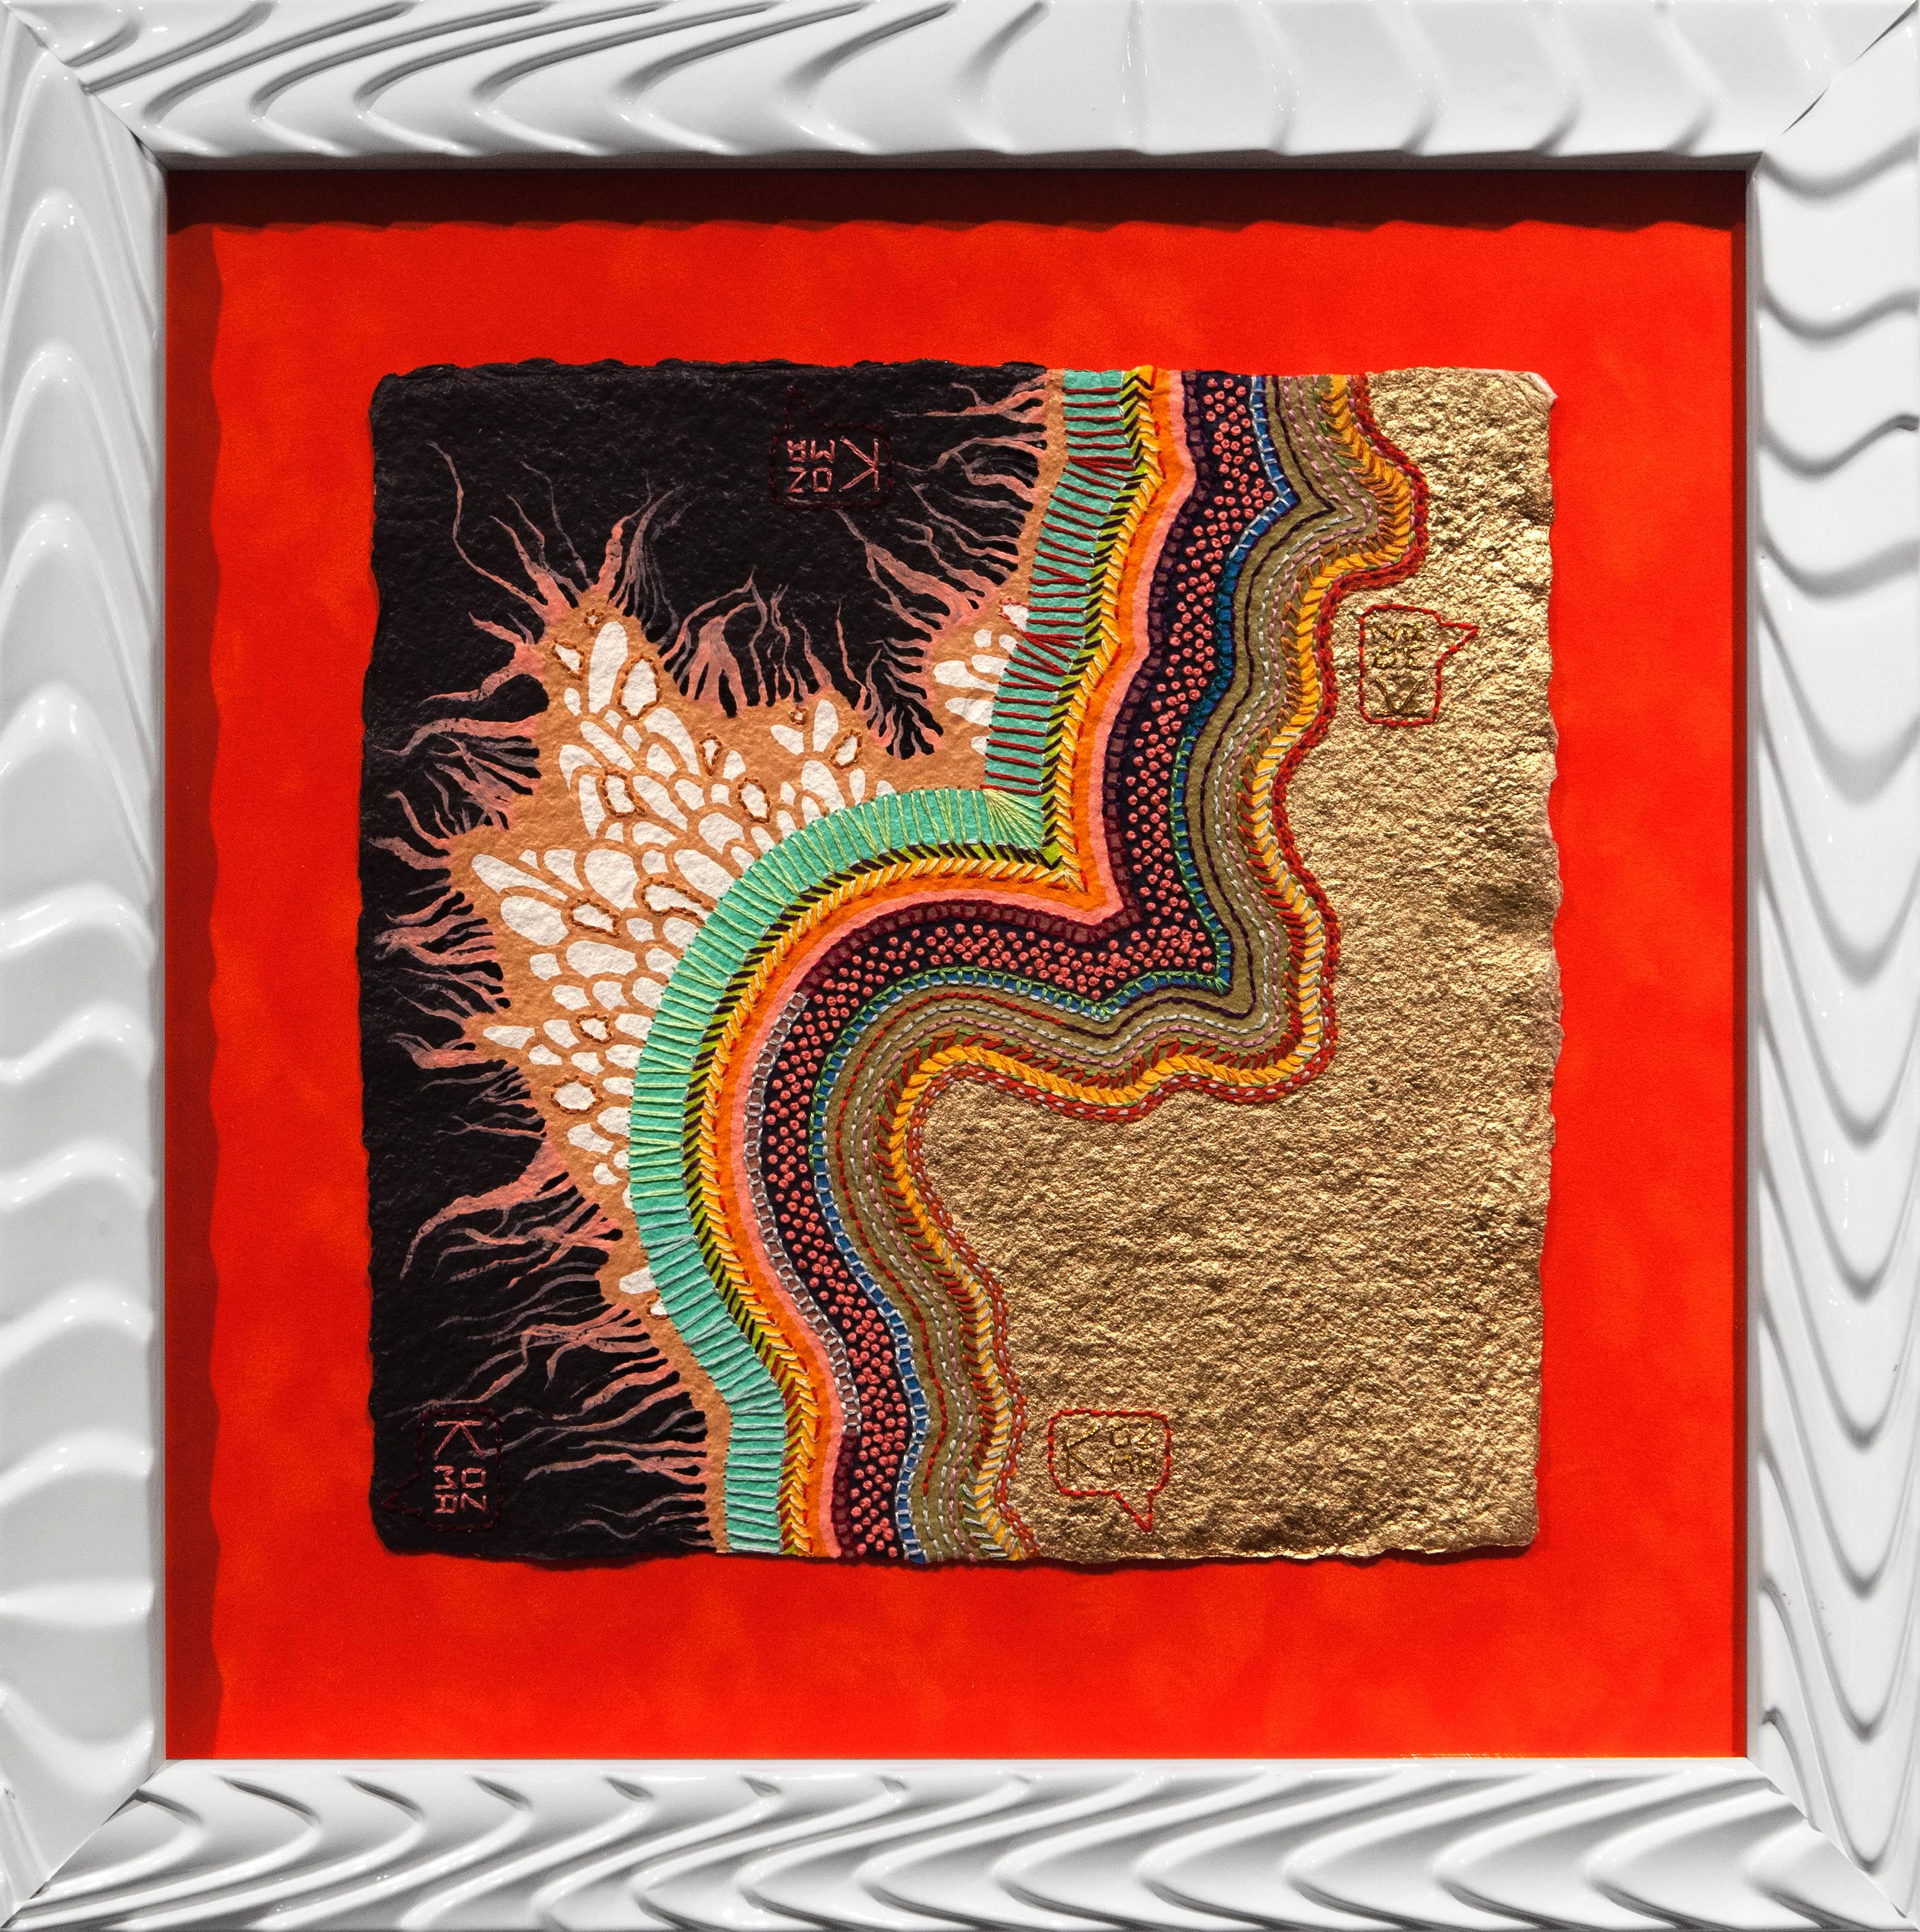 "Charge", Abstract, Wall-Hanging, Hand-Embroidered, Latex, Spray Paint - Mixed Media Art by Kelly Kozma